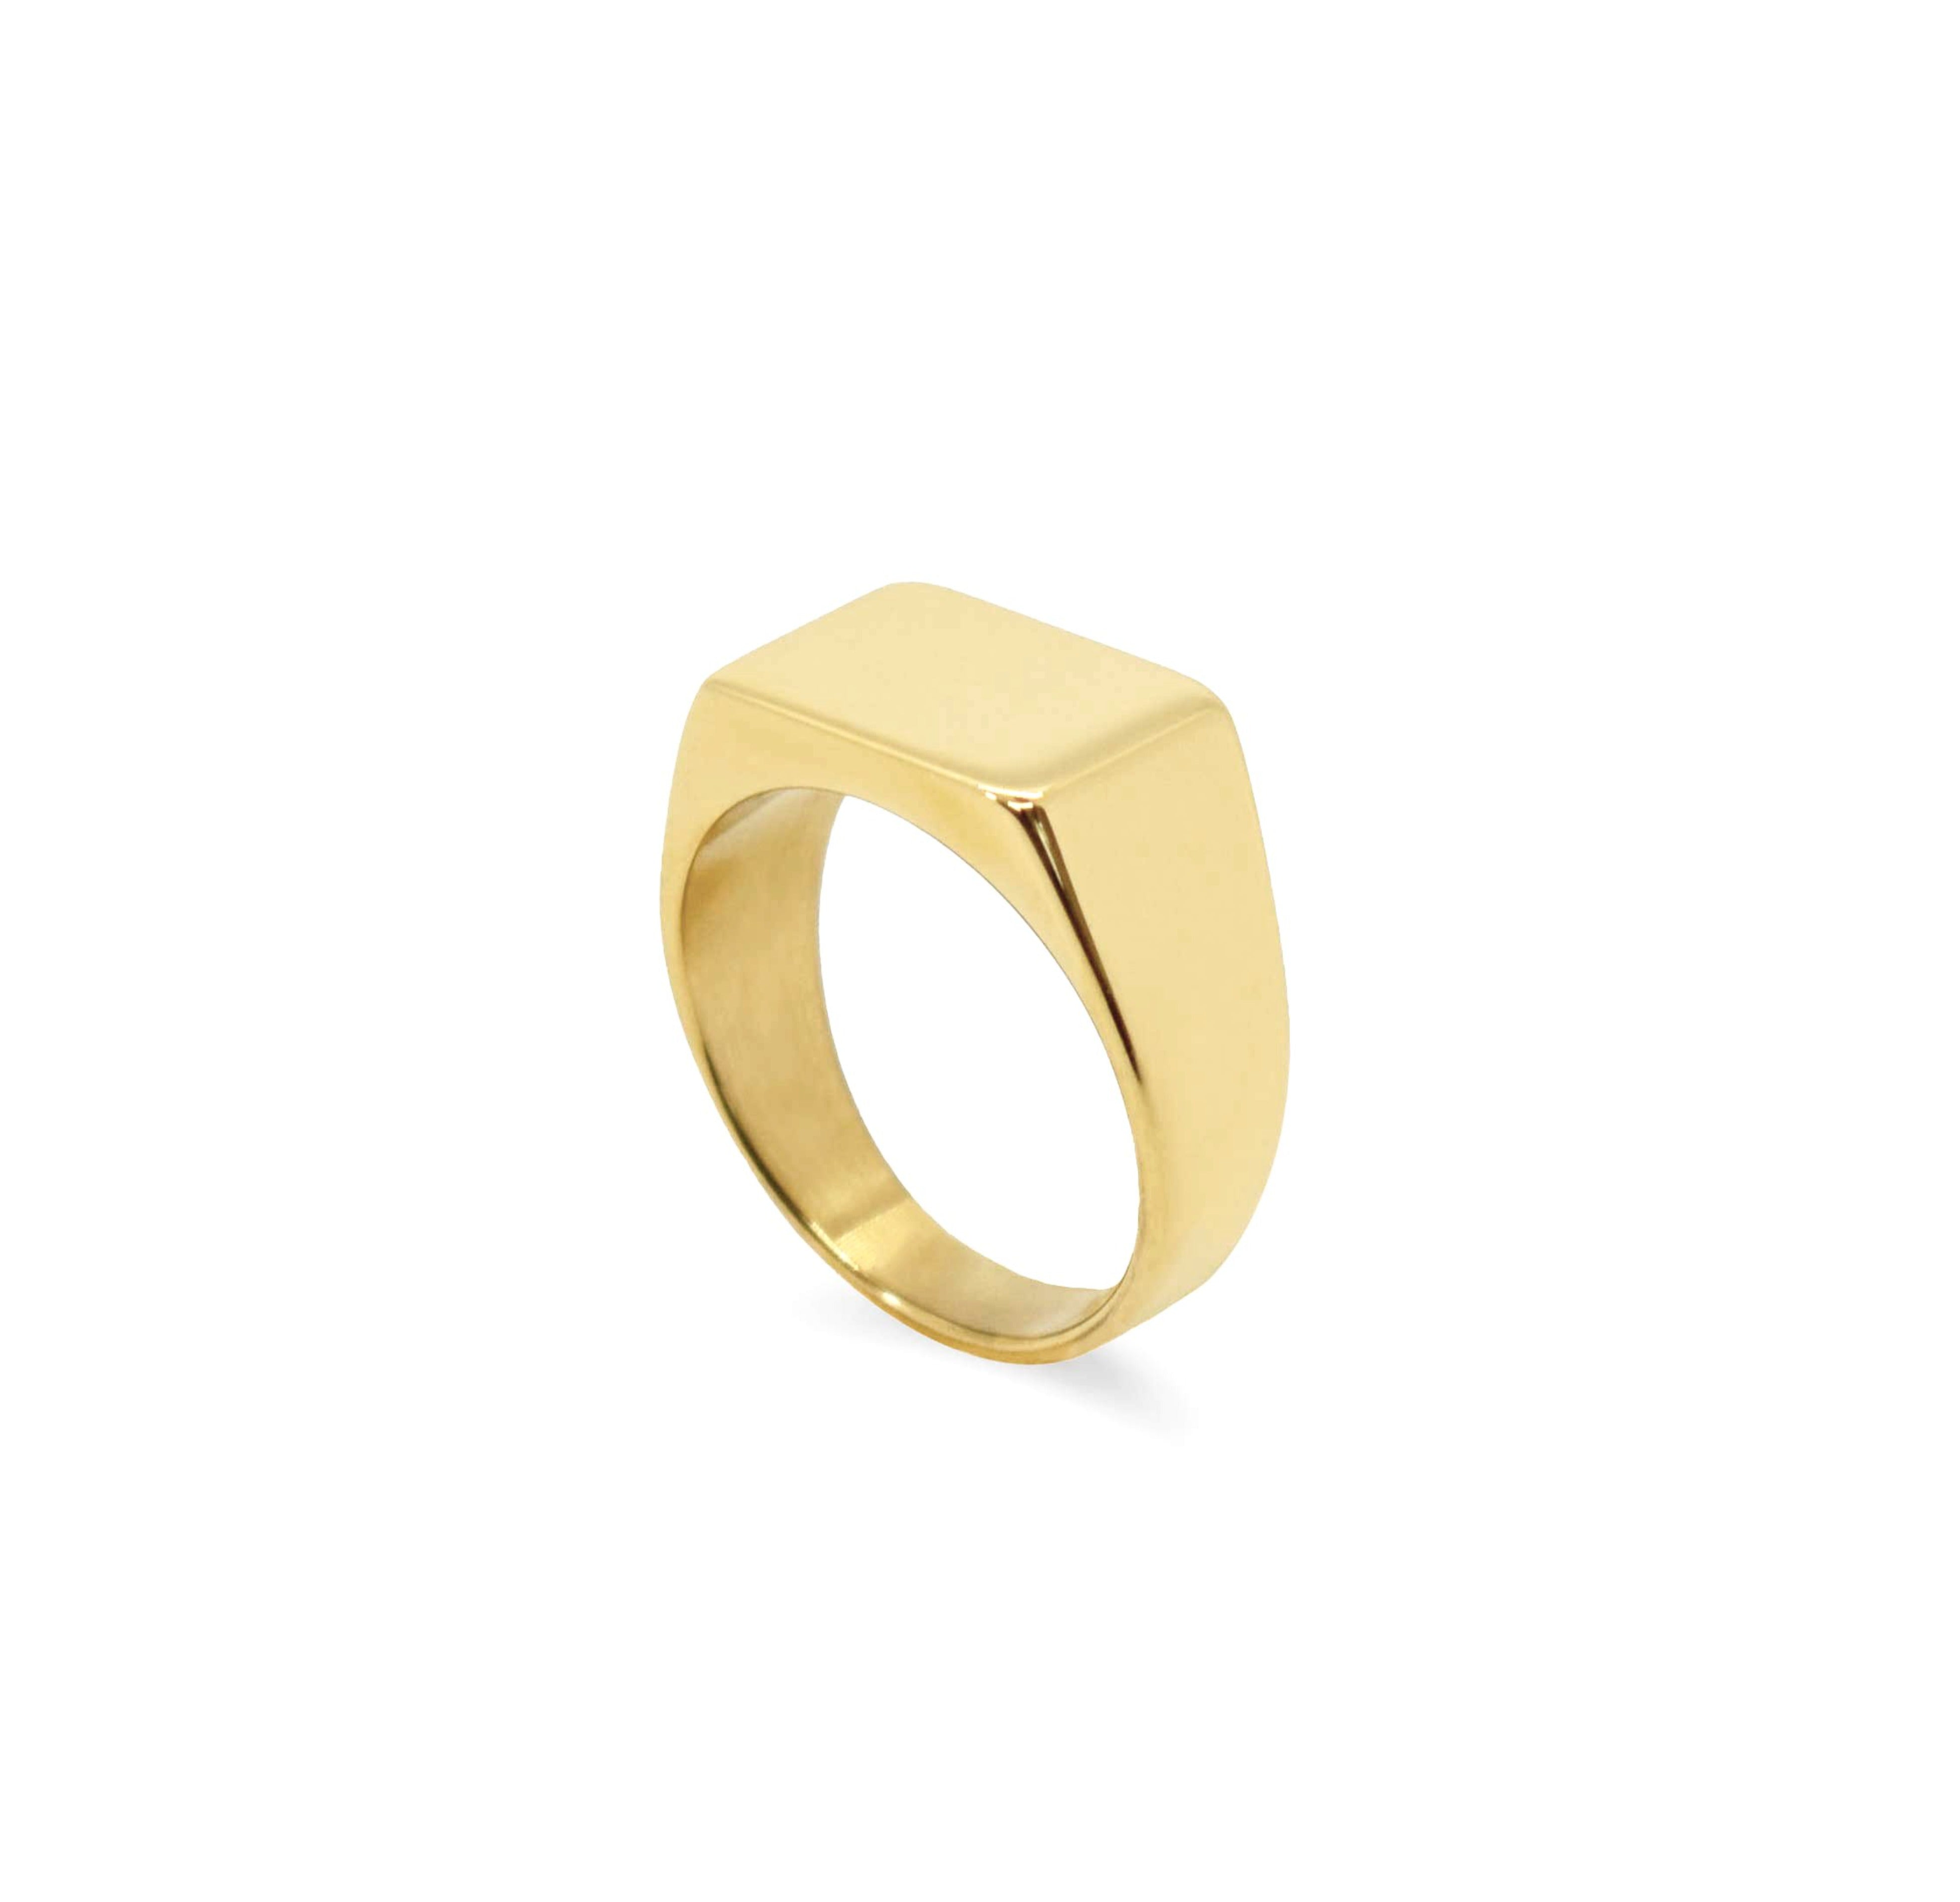 Frankie gold square signet ring, waterproof jewelry